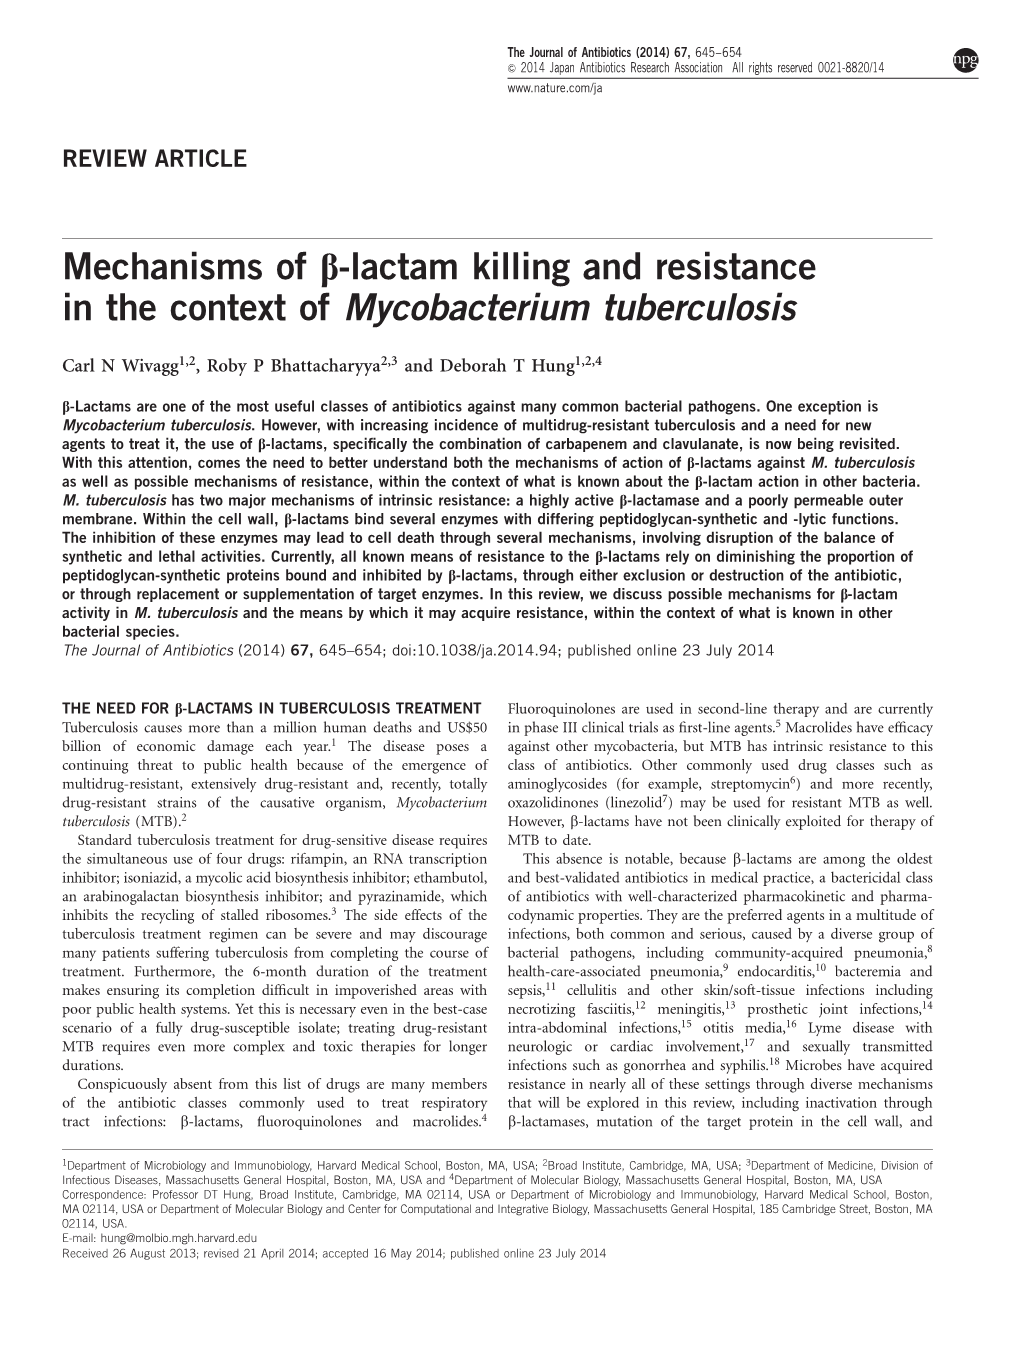 Lactam Killing and Resistance in the Context of Mycobacterium Tuberculosis